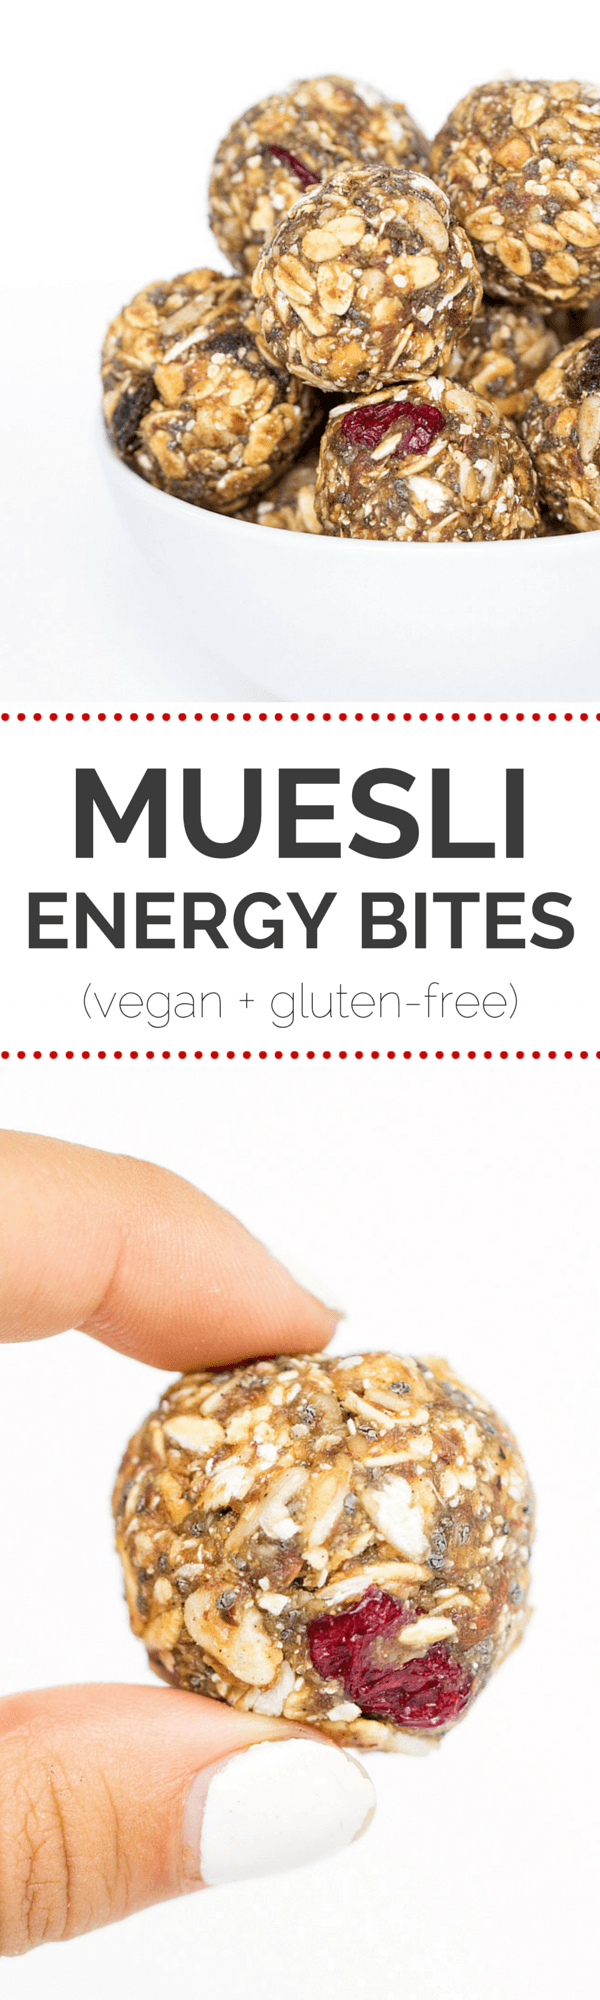 The ULTIMATE on-the-go snack are these healthy muesli energy bites made with peanut butter and flax | recipe on simplyquinoa.com | gluten-free + vegan